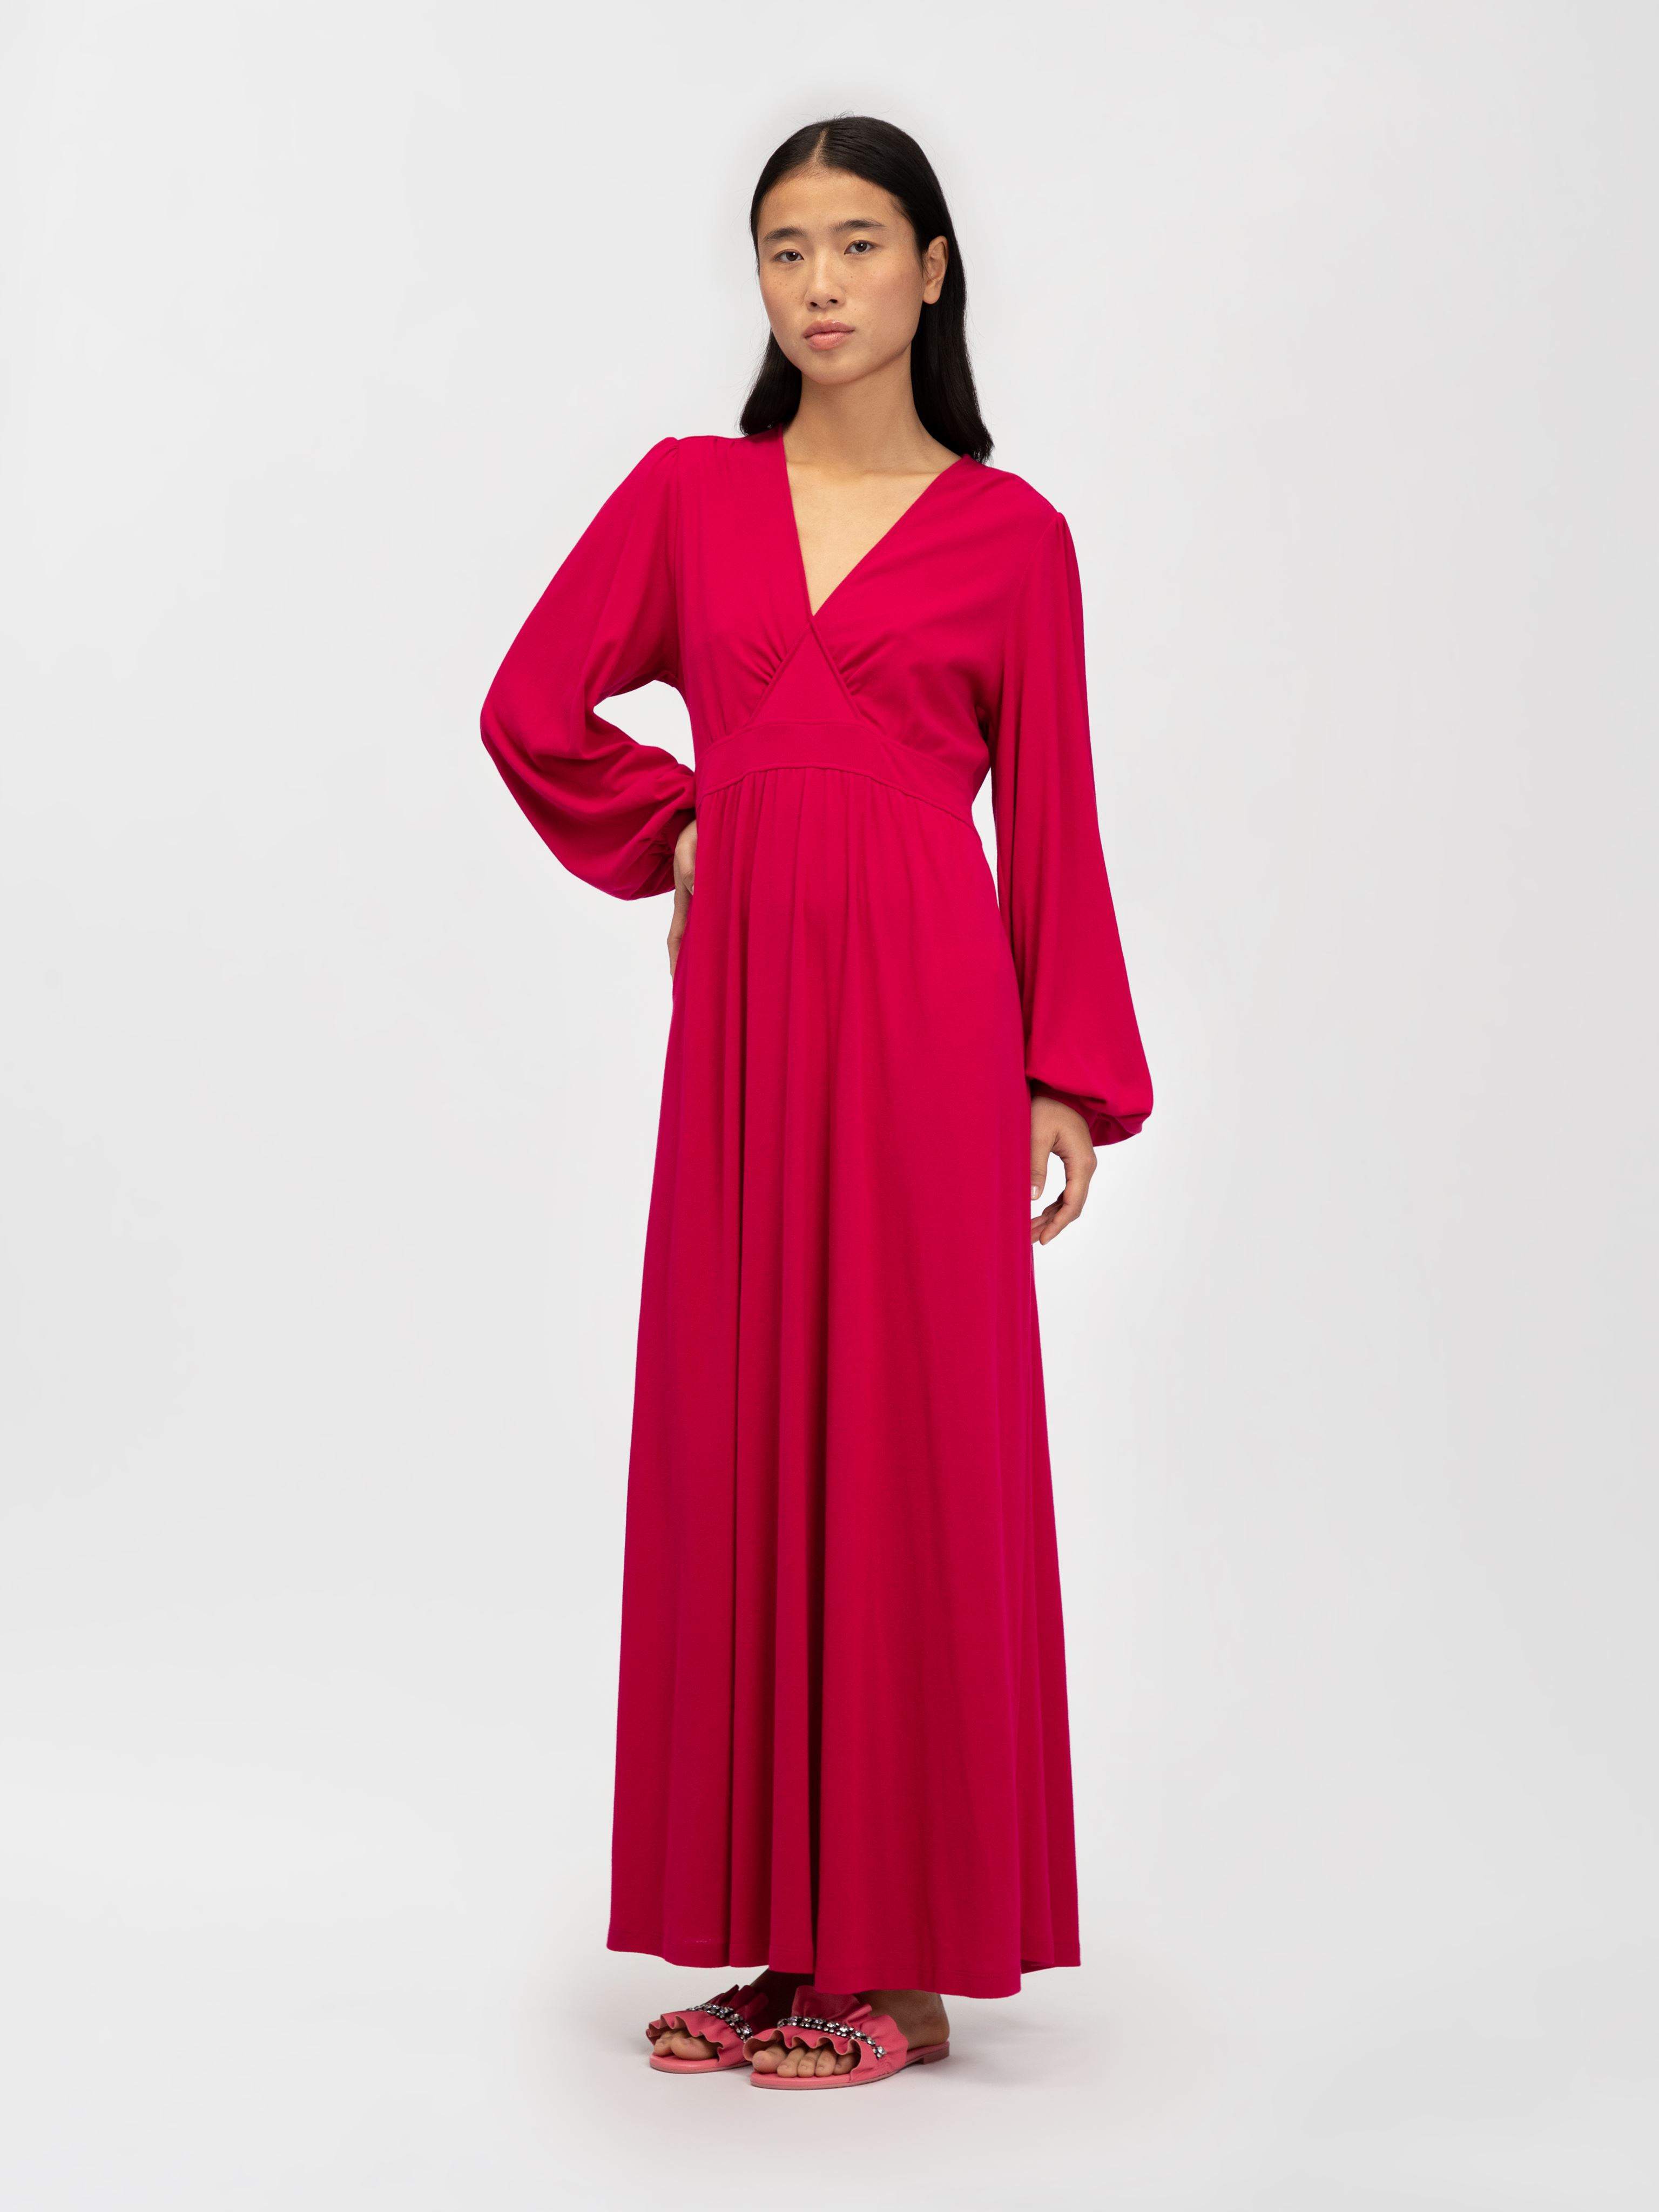 SEE BY CHLOÉ ROBE LONGUE CAFTAN FEMME ROSE TAILLE XS 100% COTON